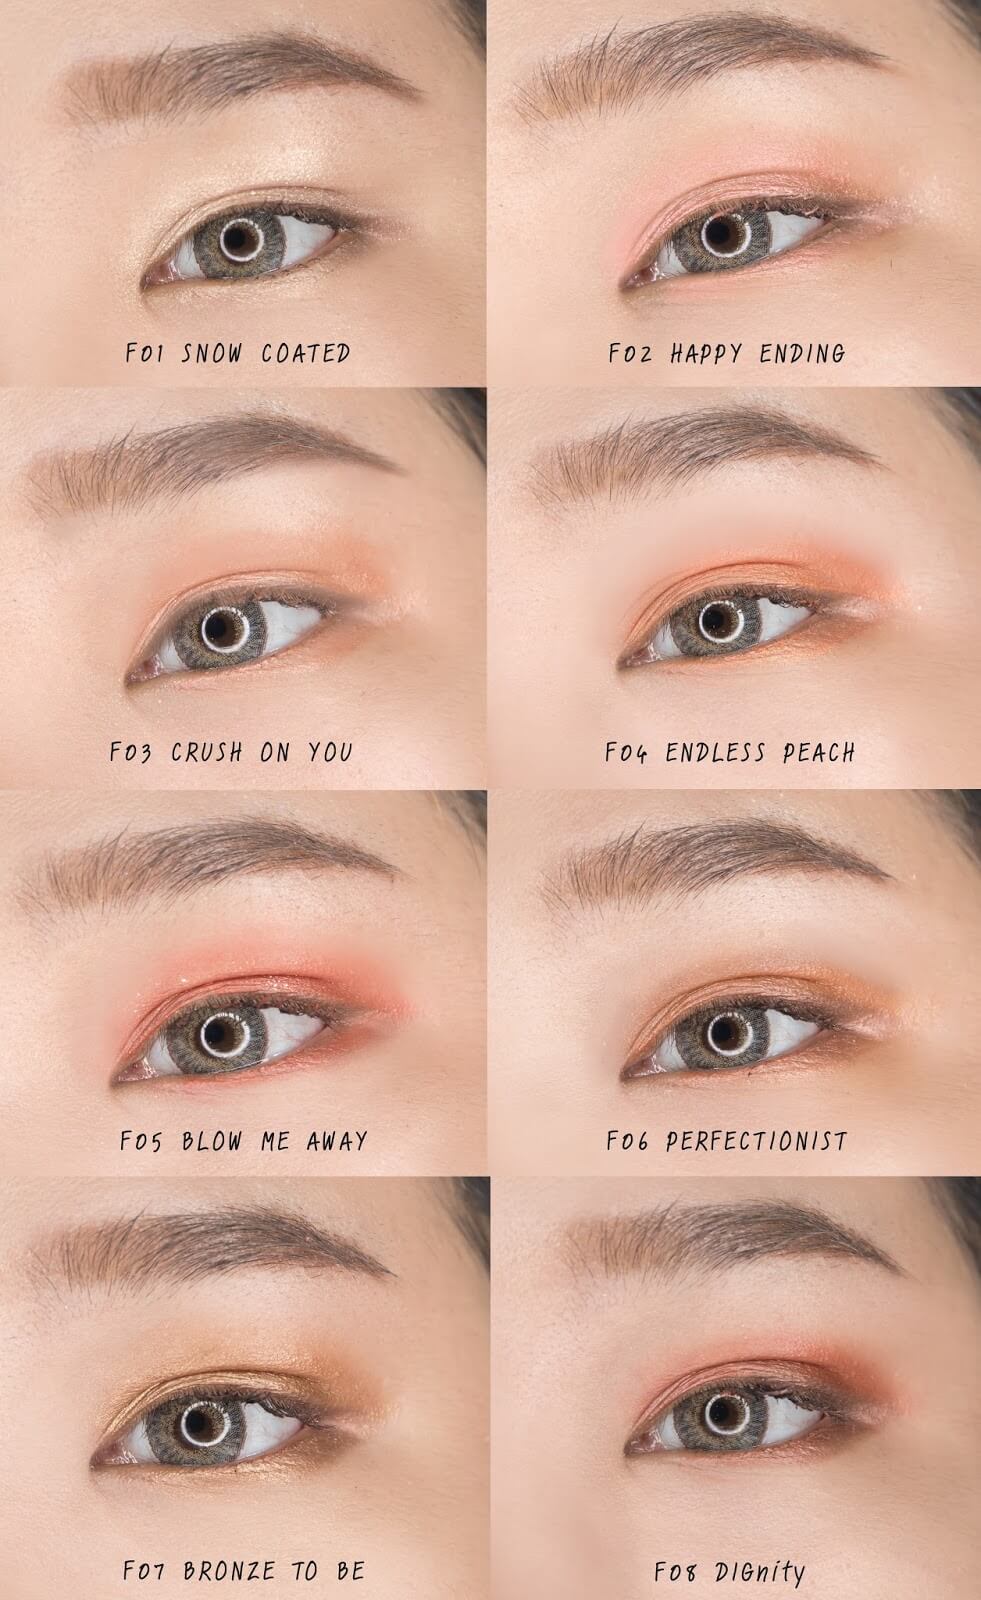 LRY Eyes And Lips Frost #F1 Snow Coated,LRY,LRY Eyes And Lips Frost,F1 Snow Coated,LRY (แอลลี่ย์) ,อาย แอนด์ ลิป,LRY Eyes And Lips Frost #F1 Snow Coatedราคา,LRY Eyes And Lips Frost #F1 Snow Coatedรีวิว